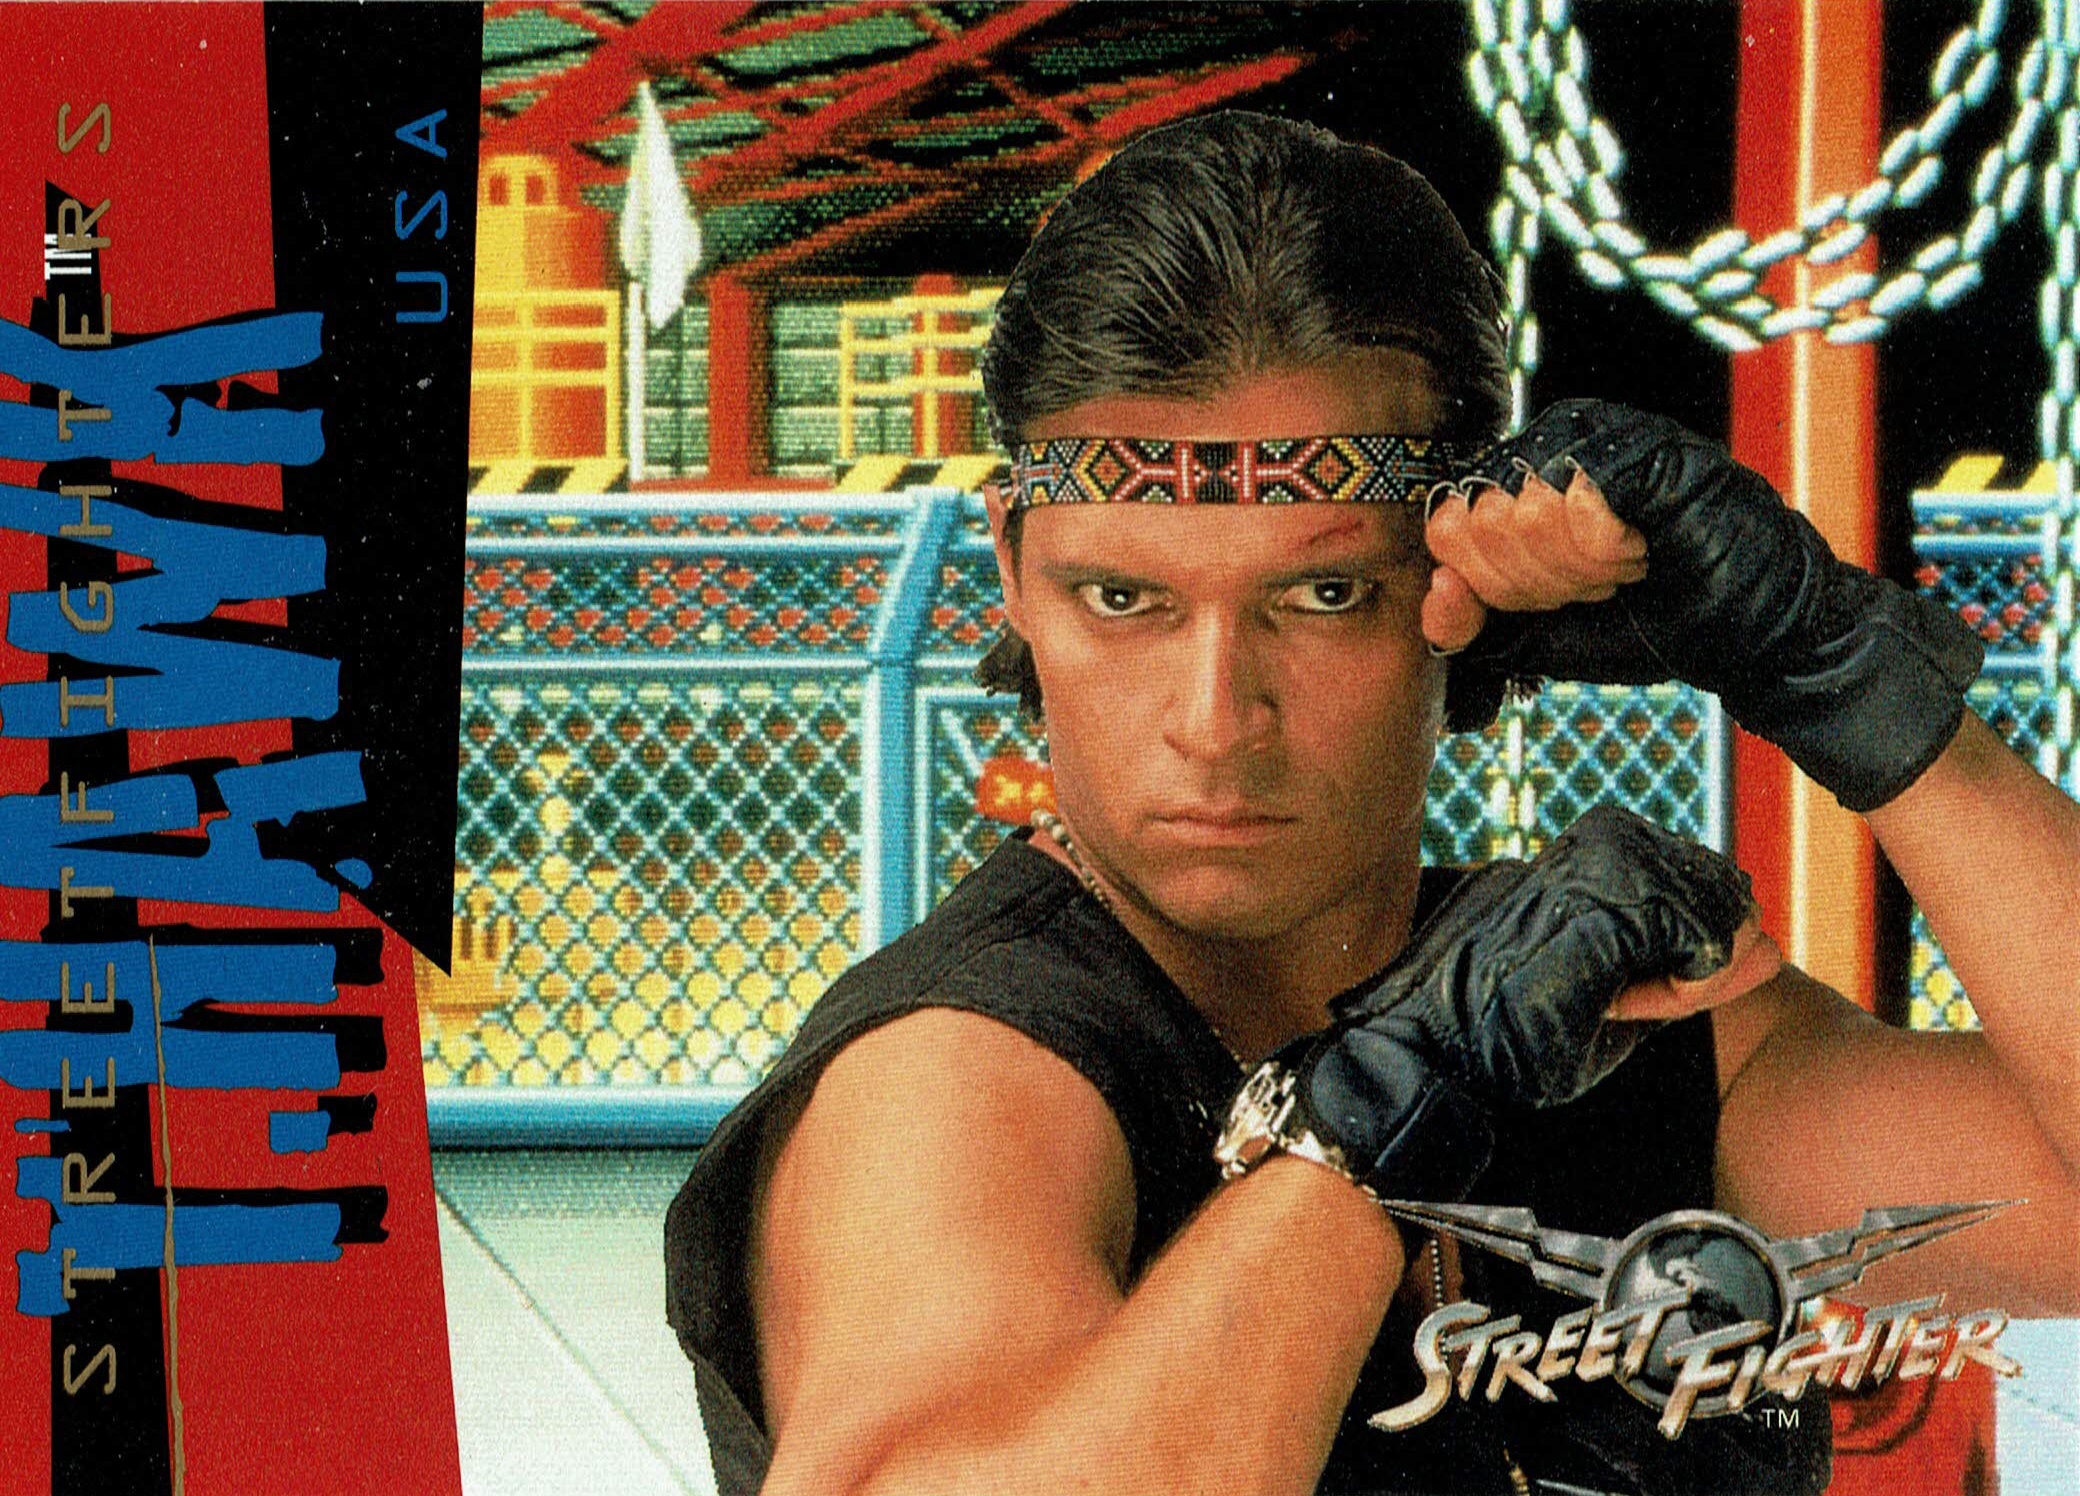 VideoGameArt&Tidbits on X: Two Street Fighter (movie) trading cards -  Dhalsim and Vega.  / X